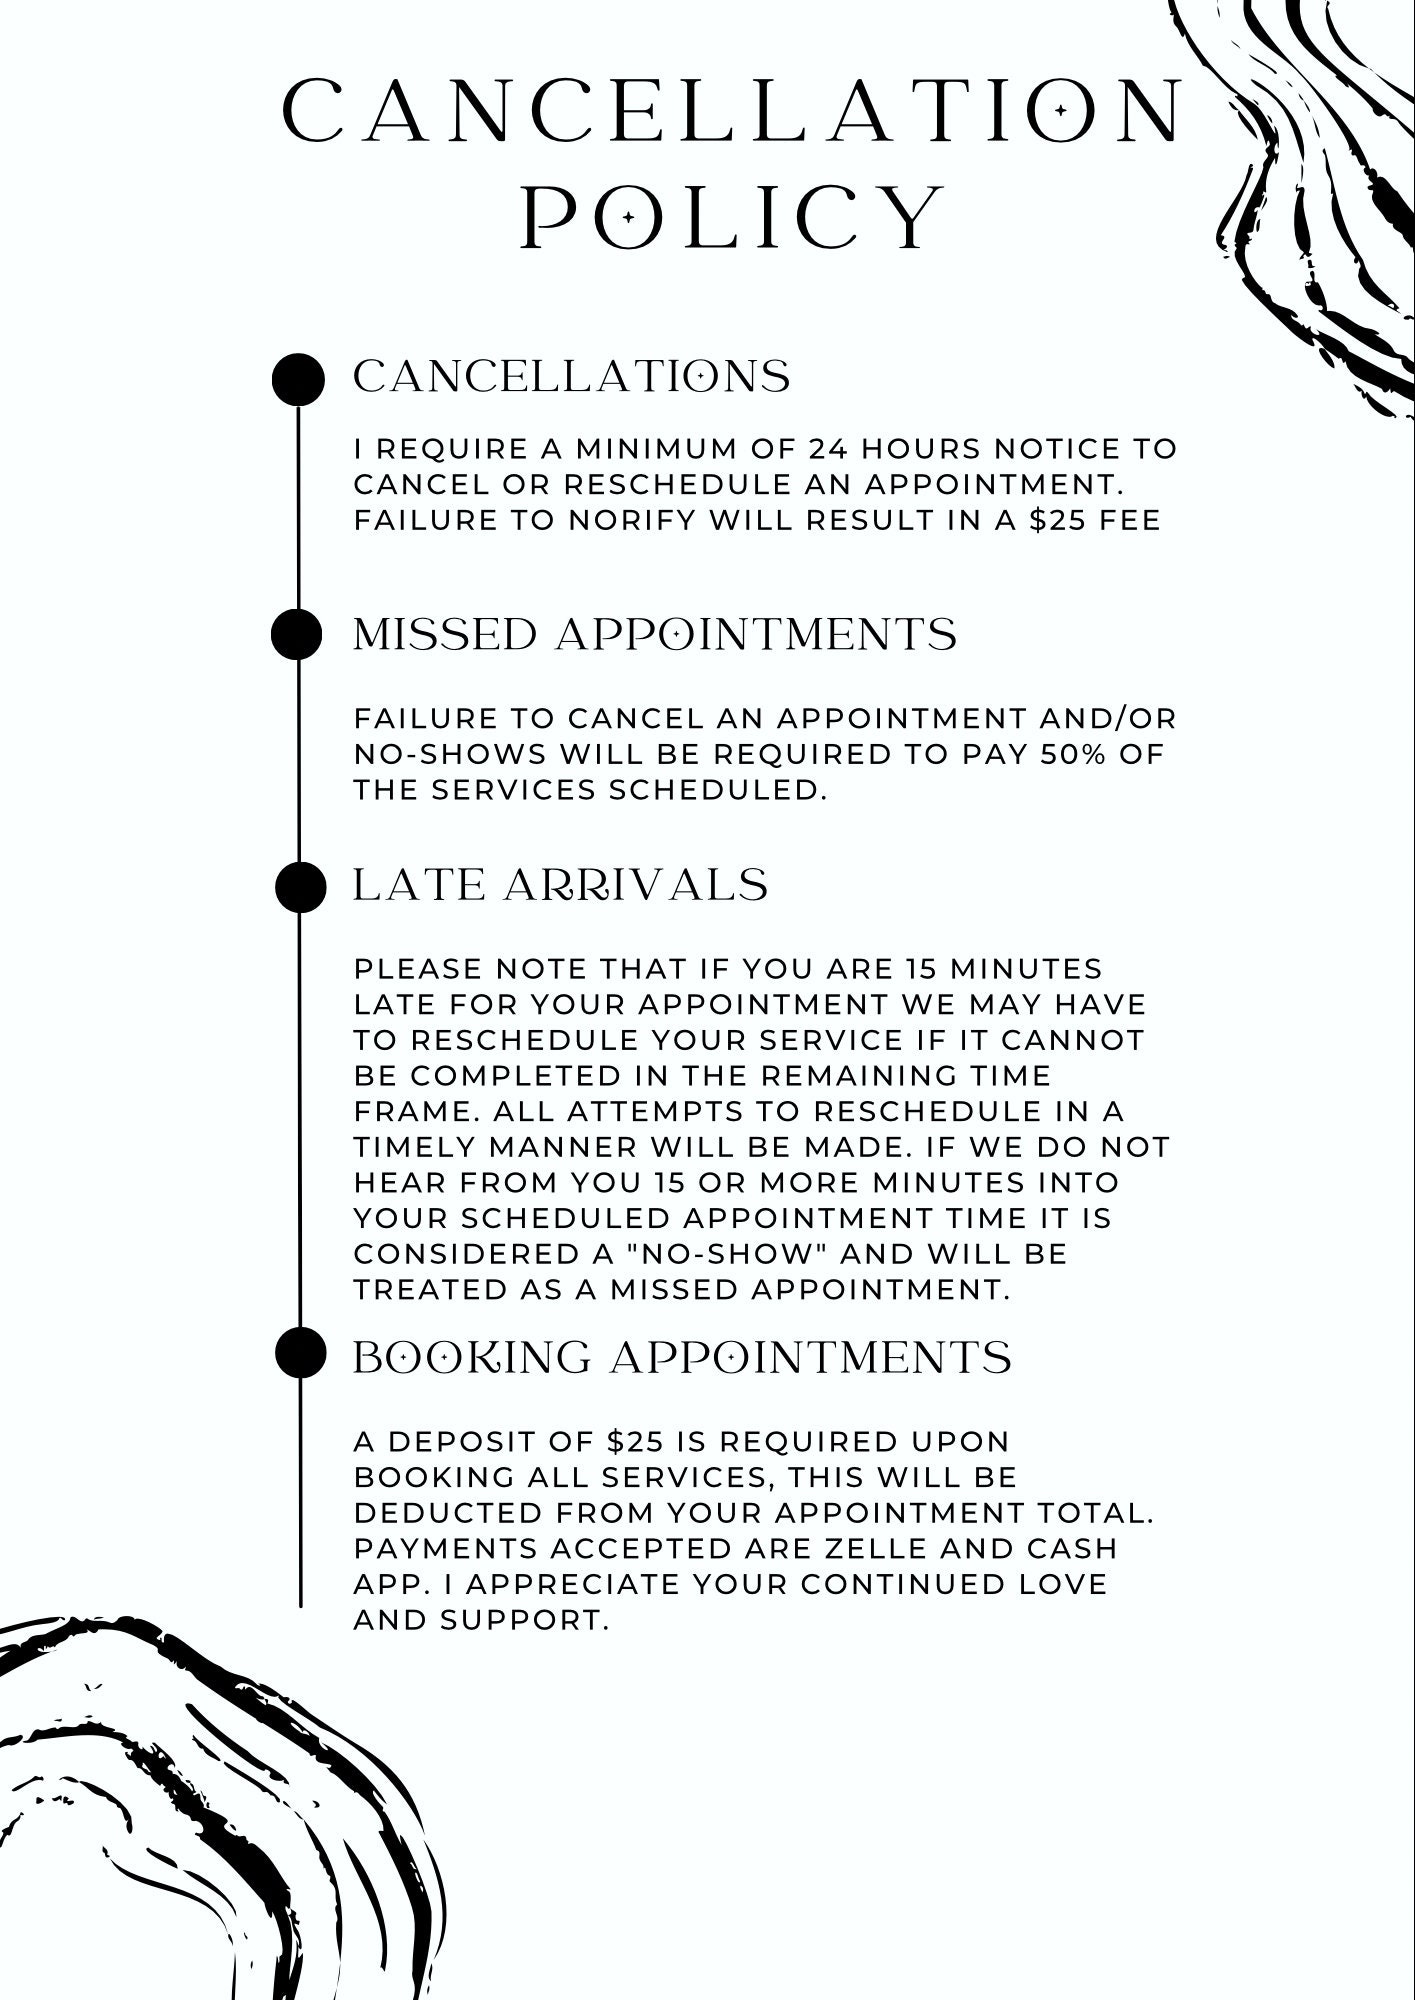 Nail Technician resume example + guide [Get a top job]